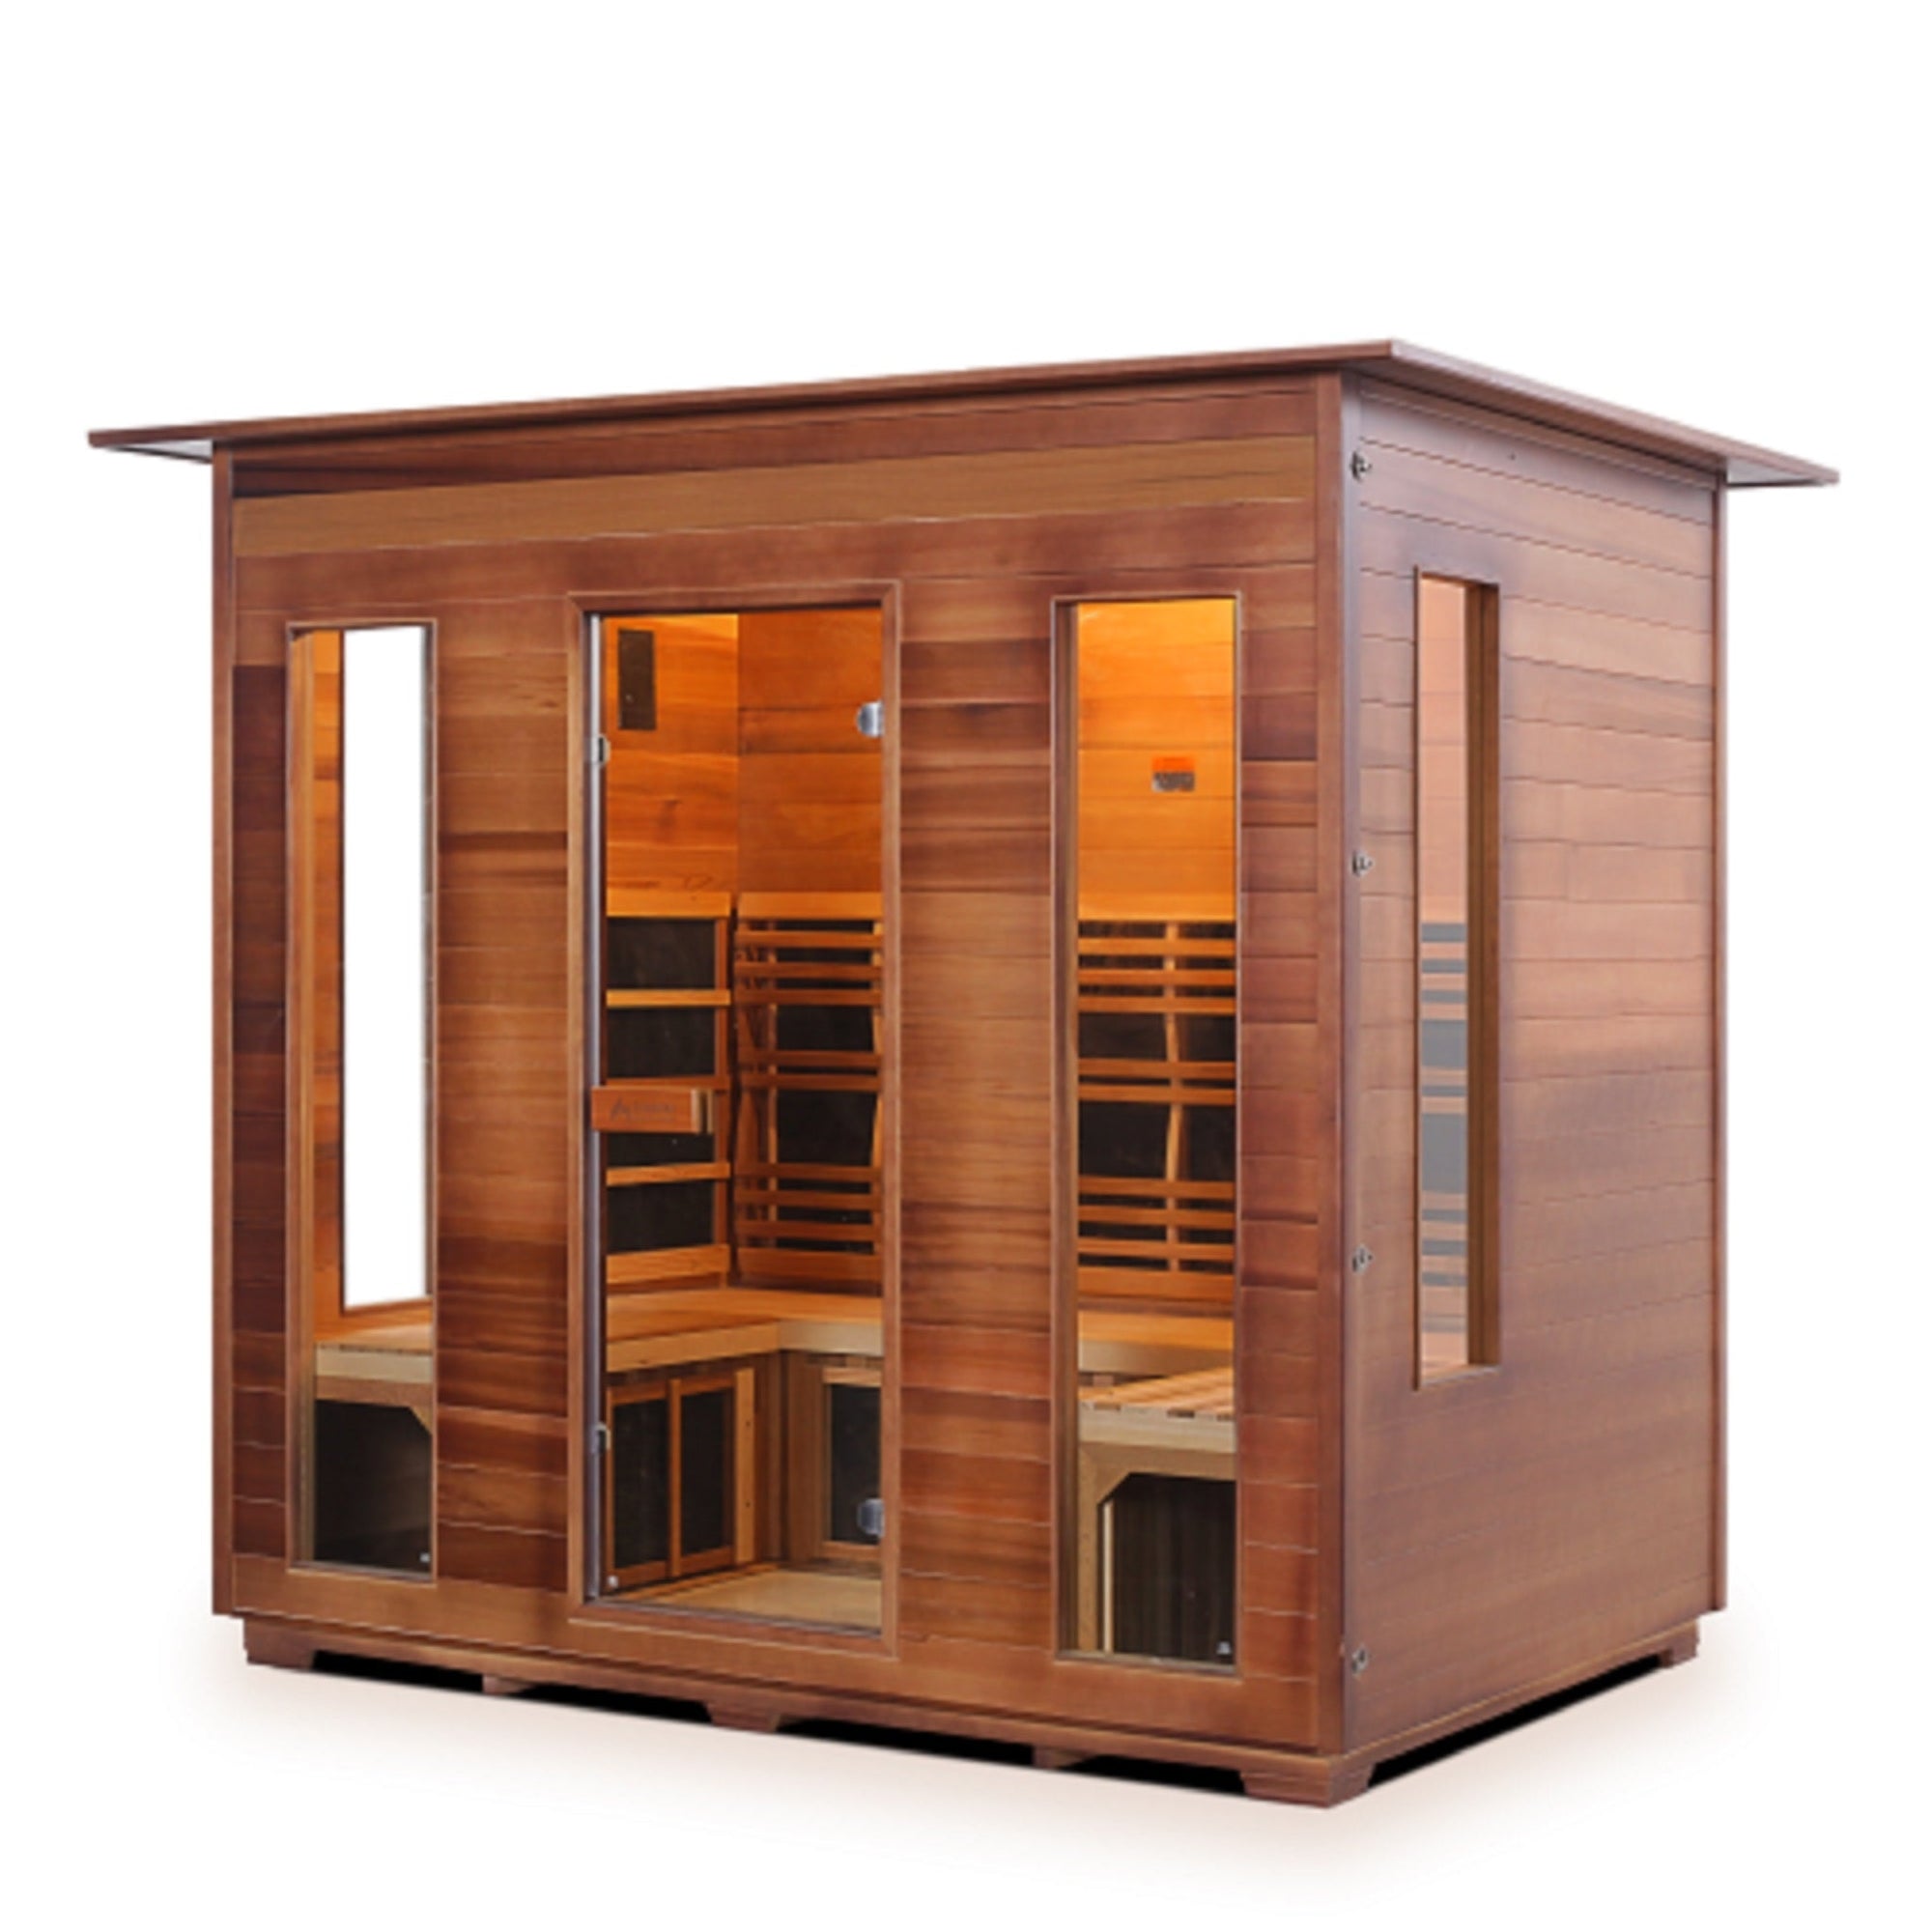 Enlighten Sauna Infrared/Traditional DIAMOND Canadian Red Cedar Wood Outside And Inside indoor Roofed five person sauna with glass door and windows isometric view - Vital Hydrotherapy